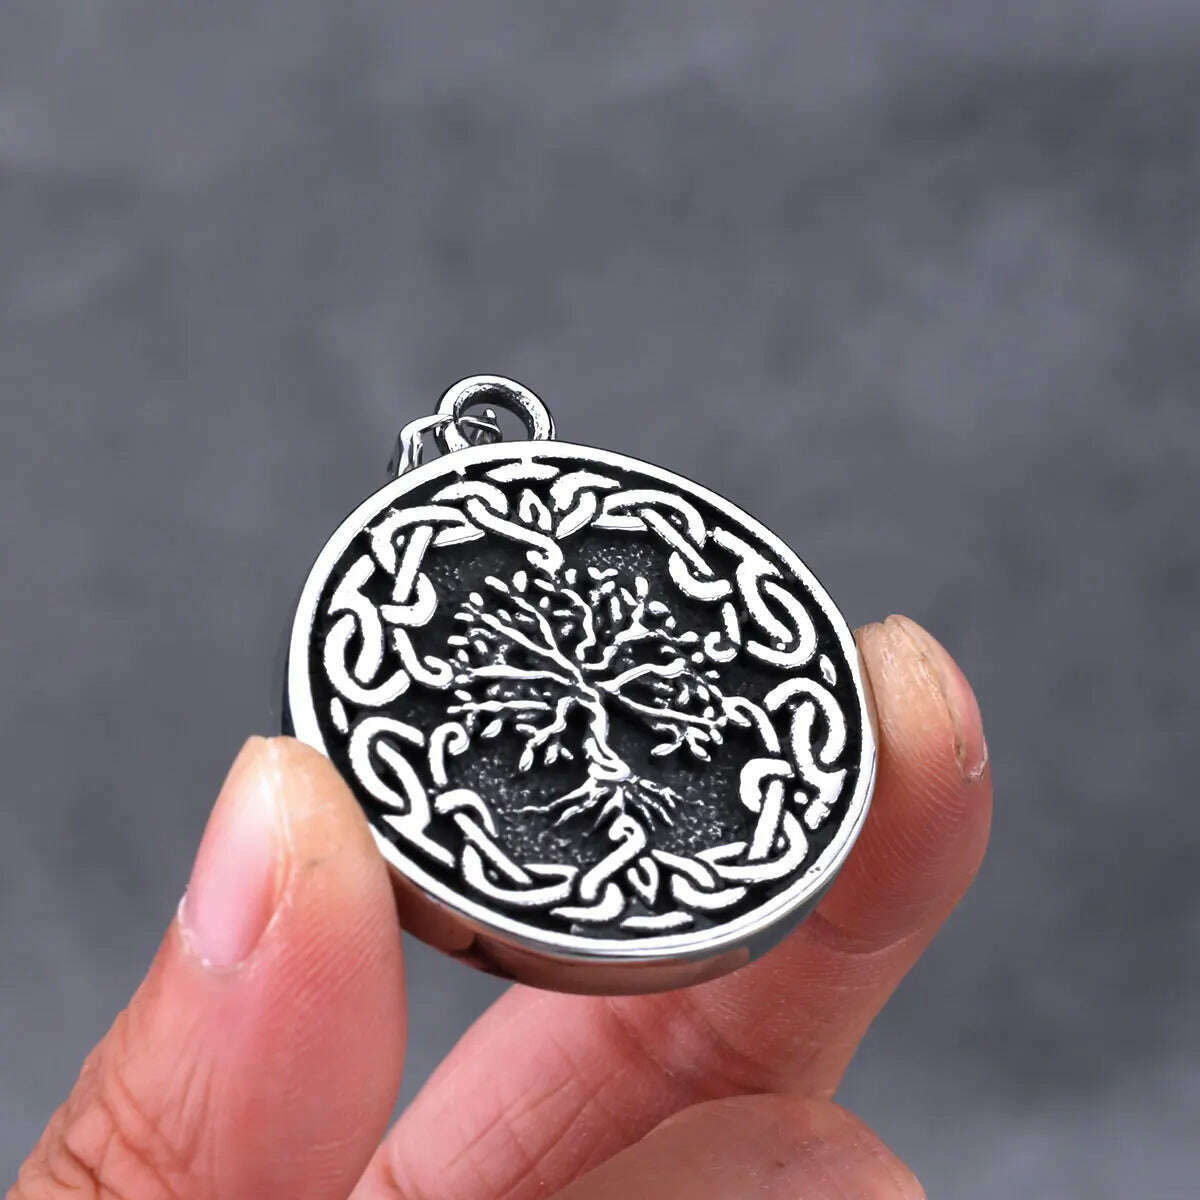 KIMLUD, Stainless Steel Viking Tree of Life Necklace Men&#39;s Fashion Vintage Hip Hop Biker Charm Pendant Necklace Amulet Jewelry Wholesale, chainless, KIMLUD Womens Clothes